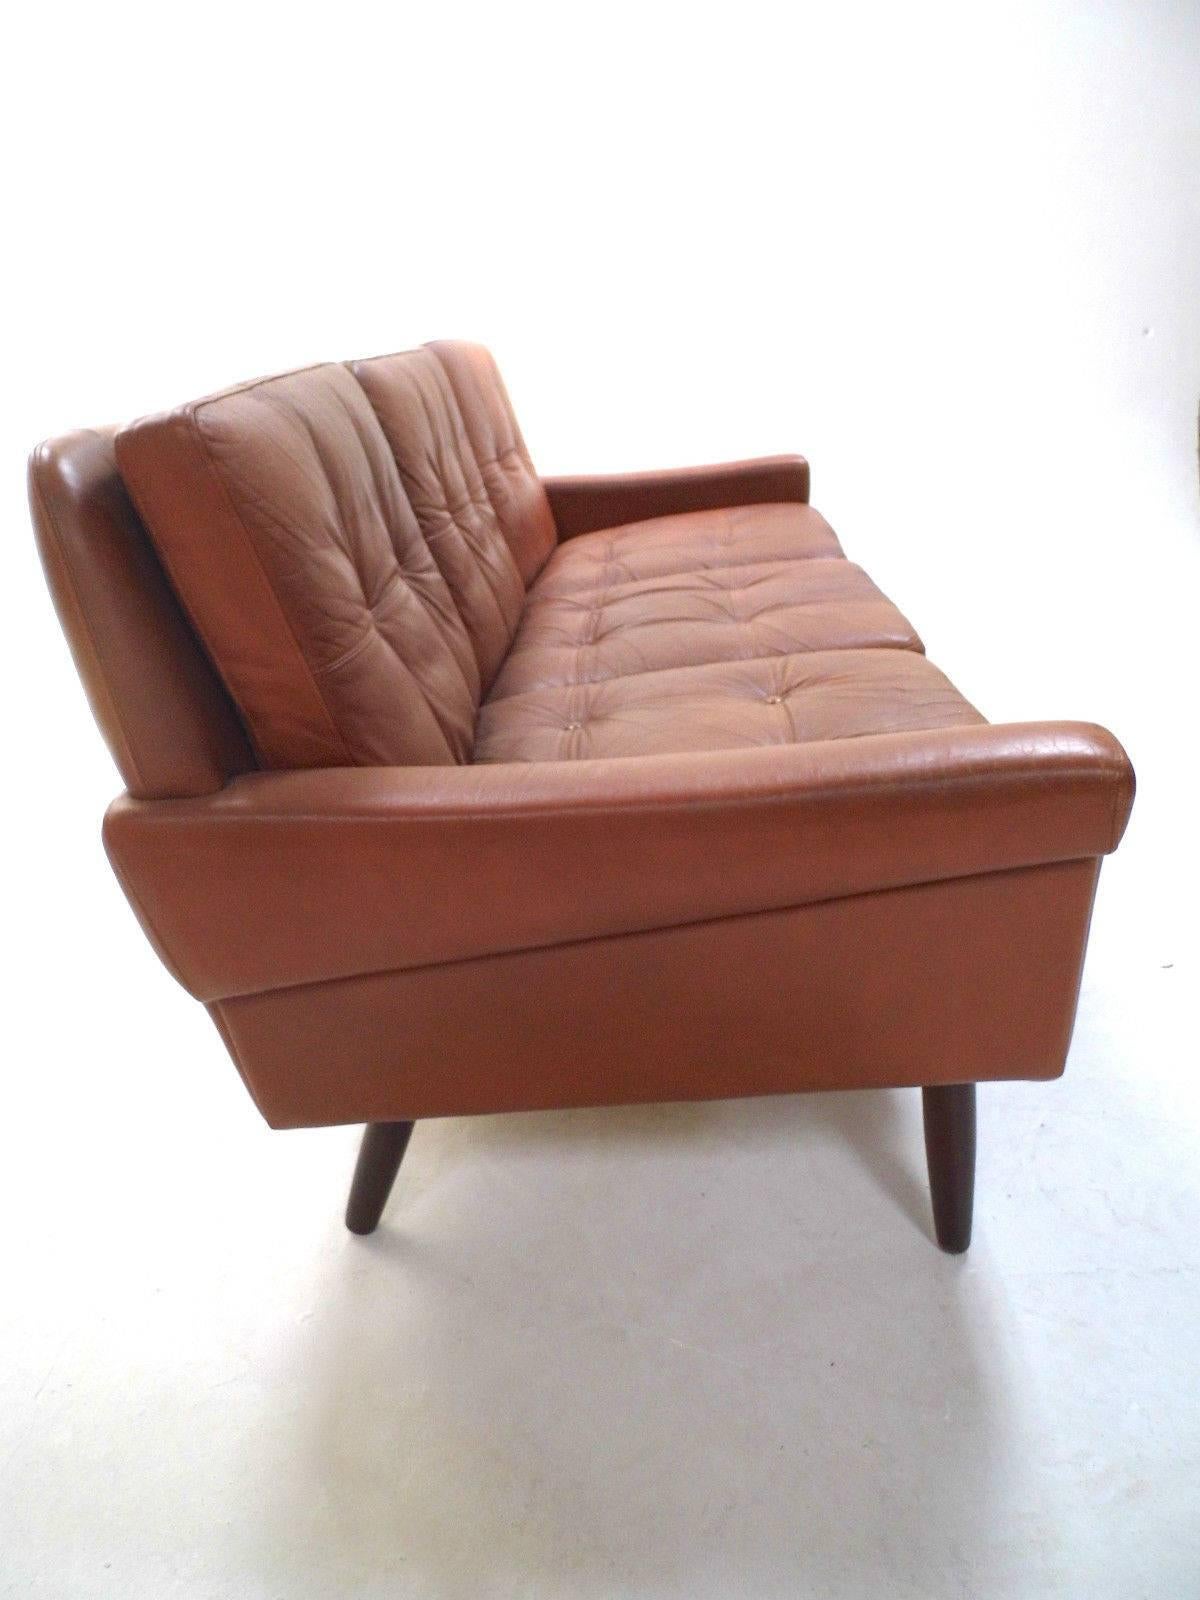 A beautiful Danish tan brown leather three-seat sofa by Skipper Møbler, this would make a stylish addition to any living or work area. The sofa has buttoned cushions and padded armrests for enhanced comfort. A striking piece of Classic Scandinavian